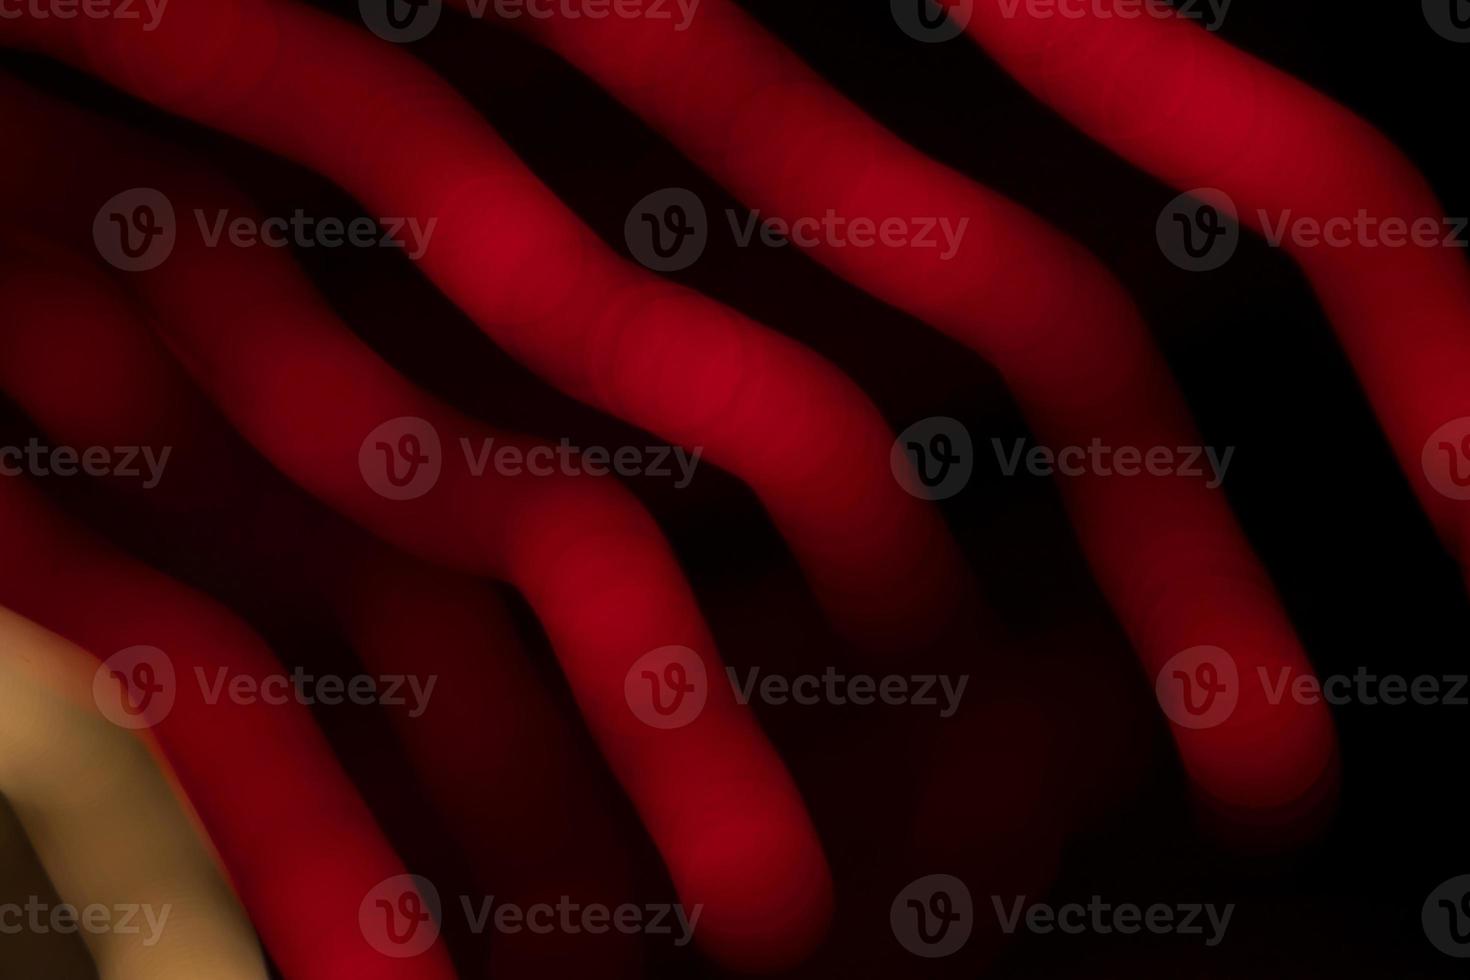 Red Defocus Abstract bokeh light effects on the night black background texture photo